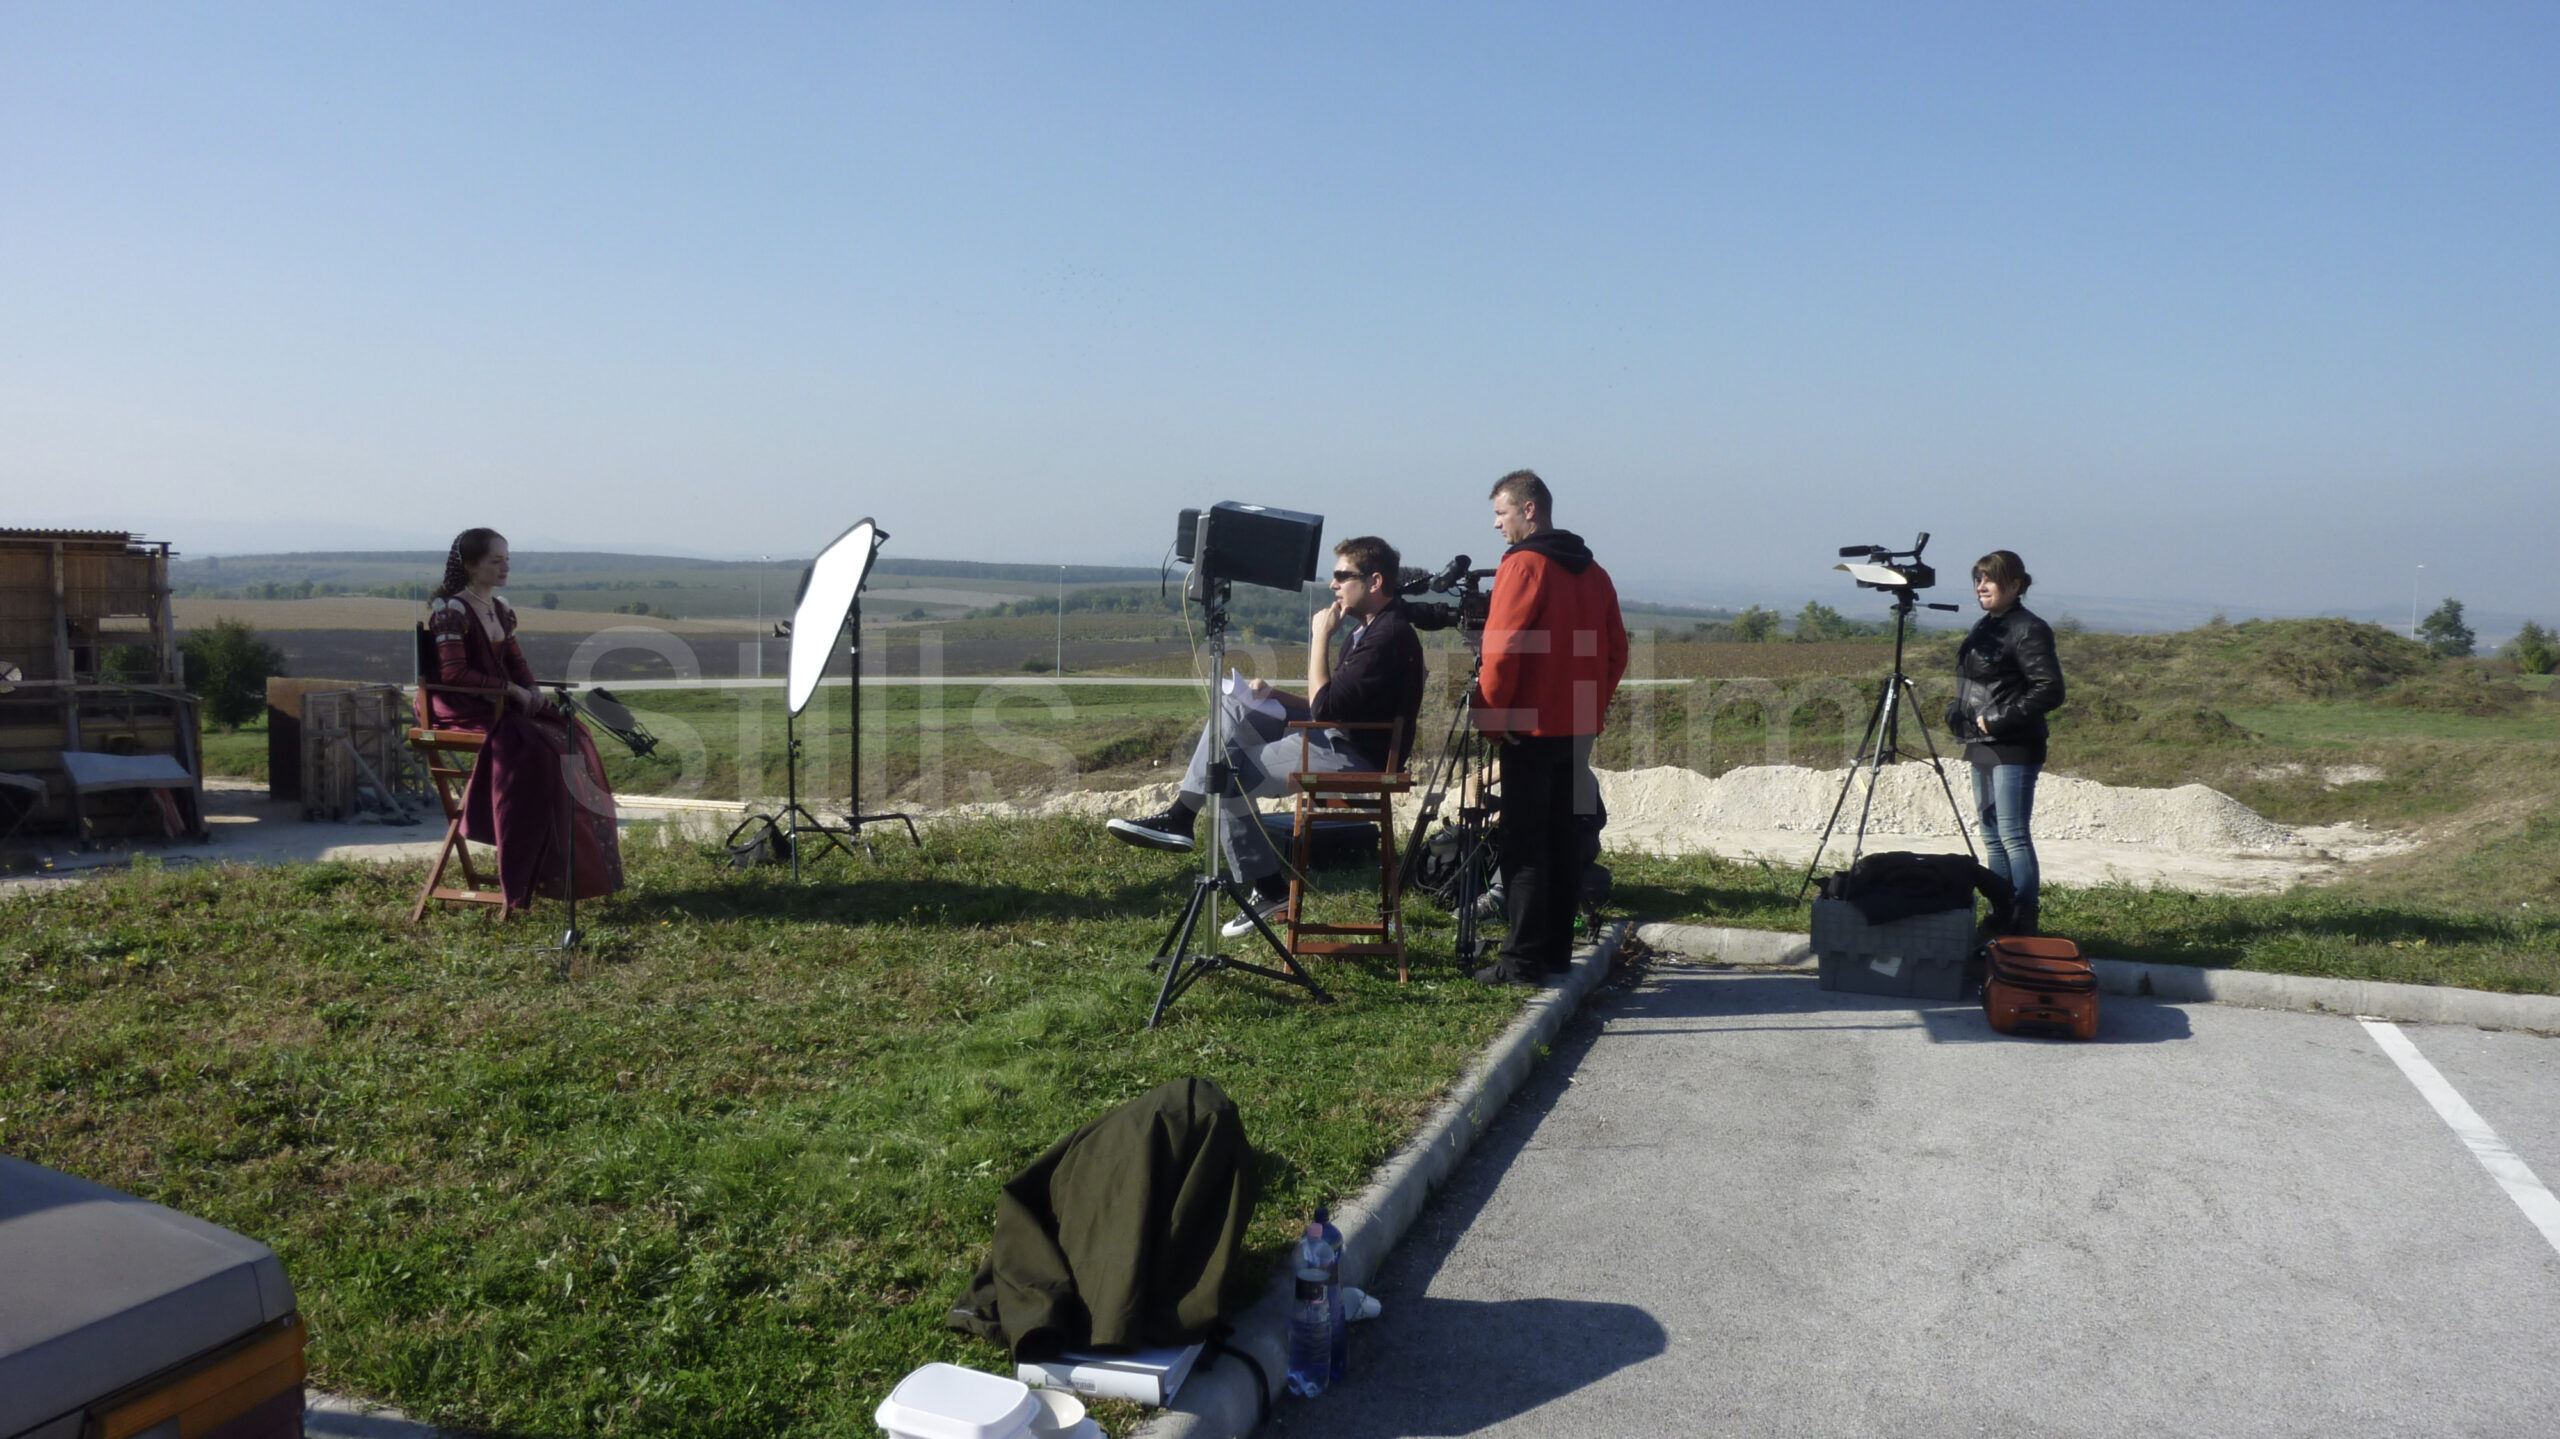 Video production team filming behind the scenes at Korda Studios, Hungary.